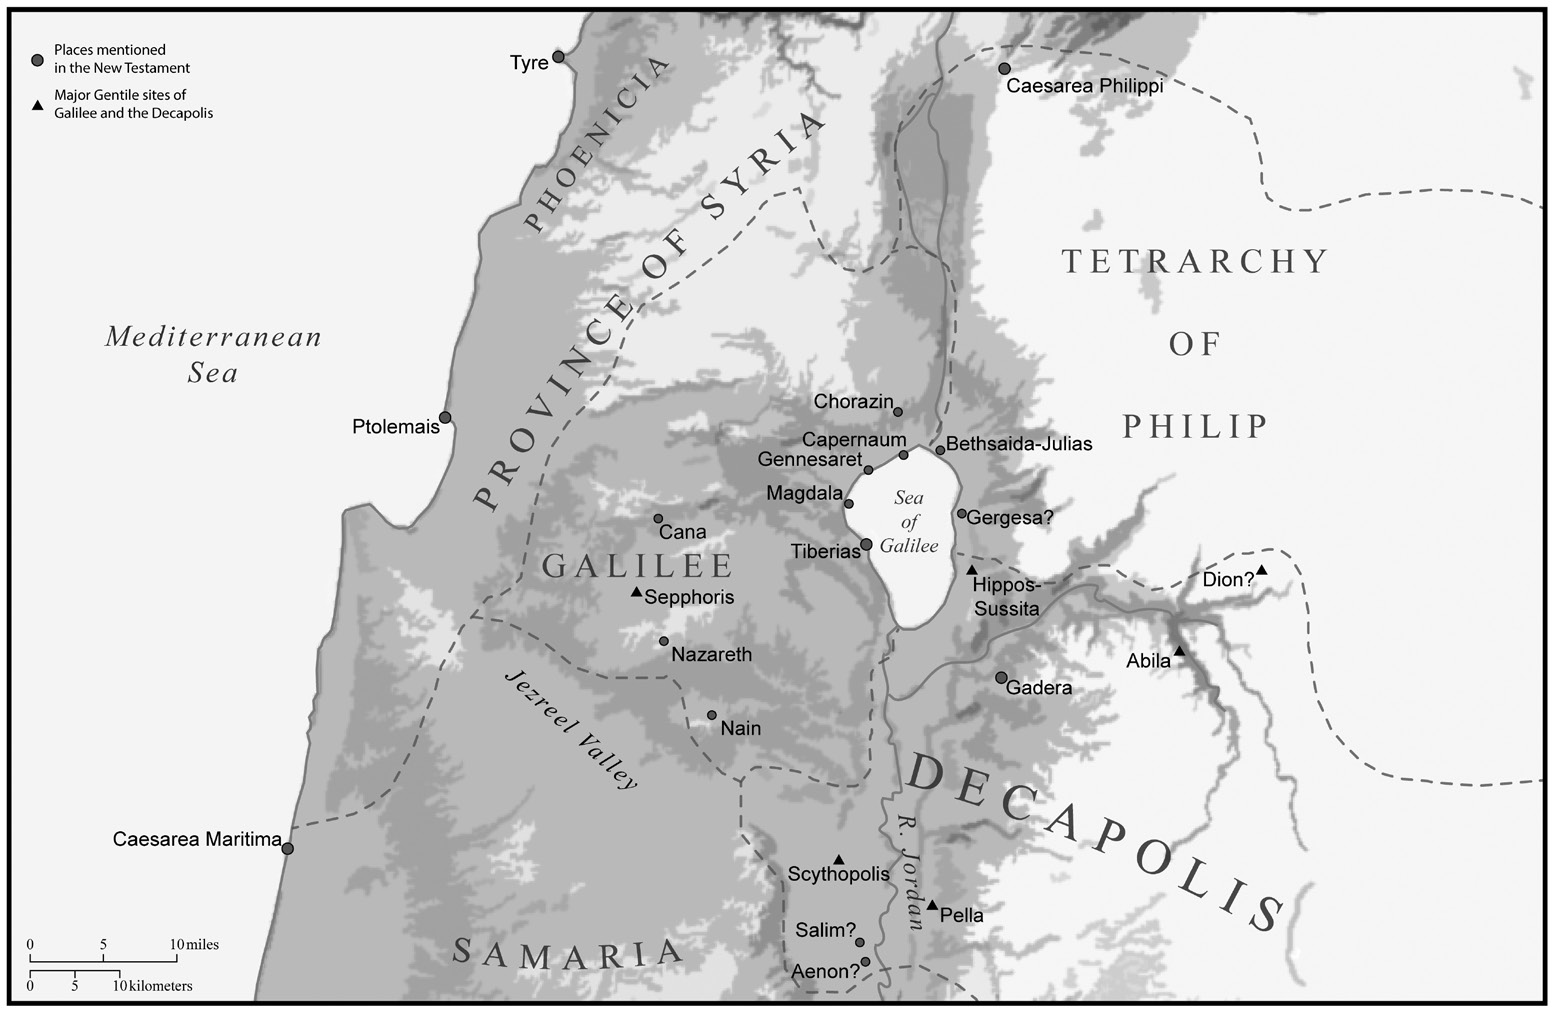 Regions and places in Galilee mentioned in the Gospels. Map by George A. Pierce.